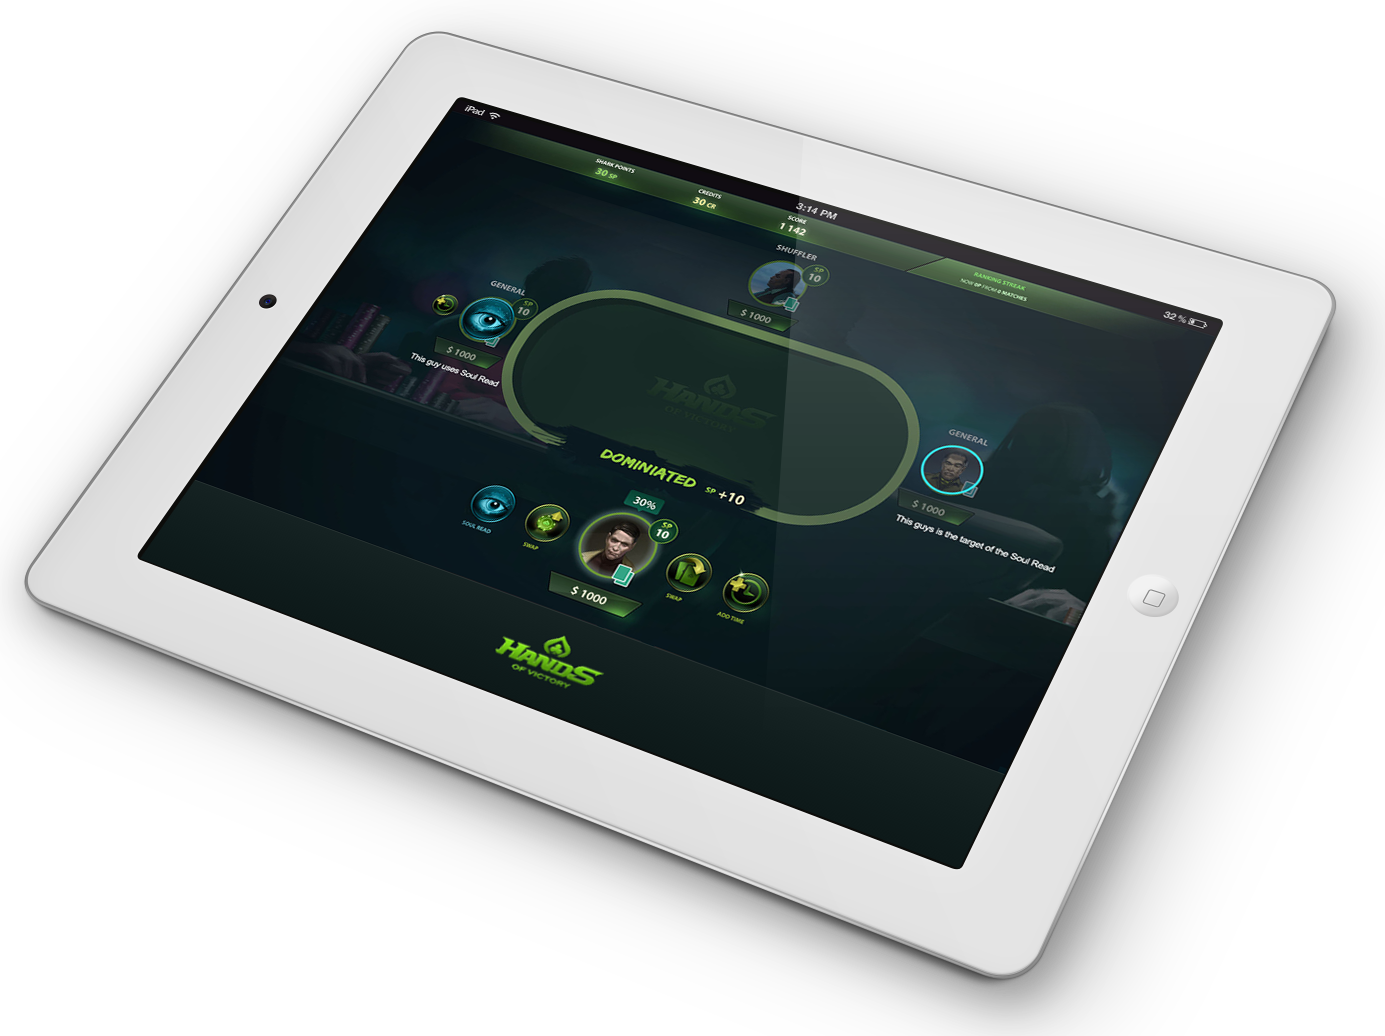 Hands of Victory - iPad|Hands of Victory - Spielfigur|Hands of Victory - Logo|Hands of Victory - Spielszene